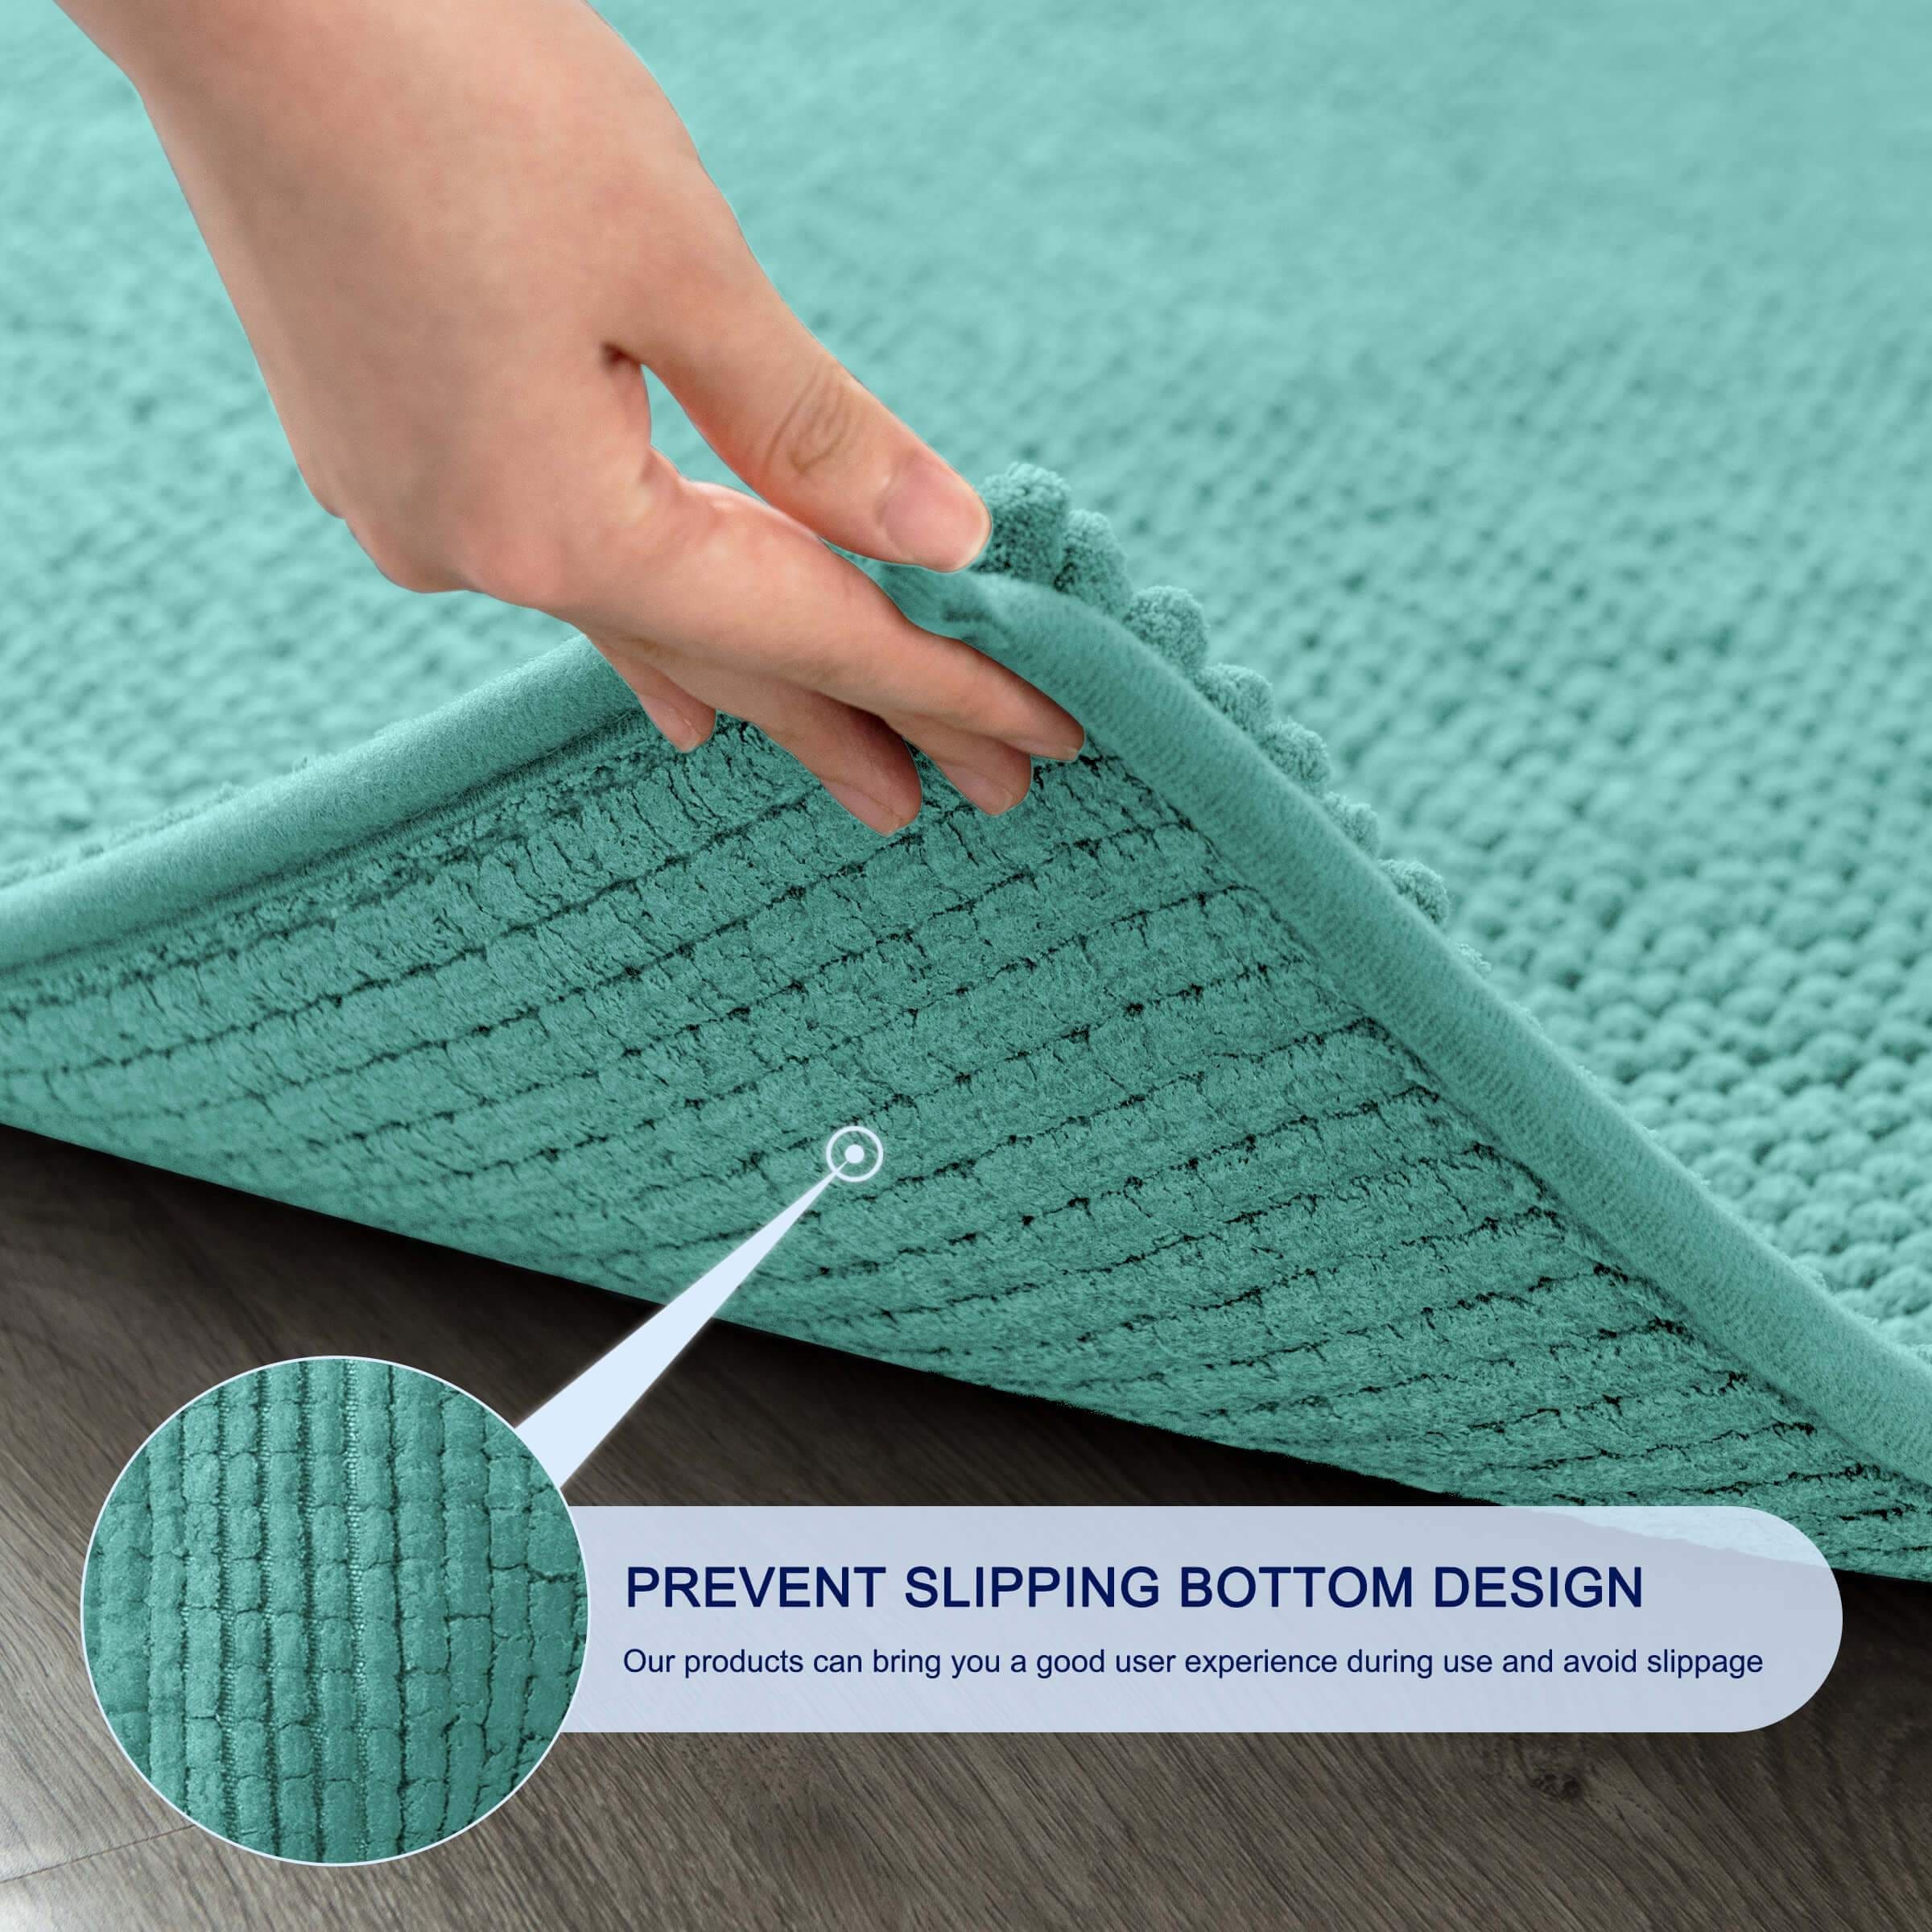 https://ak1.ostkcdn.com/images/products/is/images/direct/871a4d83fdffdc3e2764ac499b3cf10562f8ad9b/Subrtex-Chenille-Bathroom-Rugs-Soft-Super-Water-Absorbing-Shower-Mats.jpg